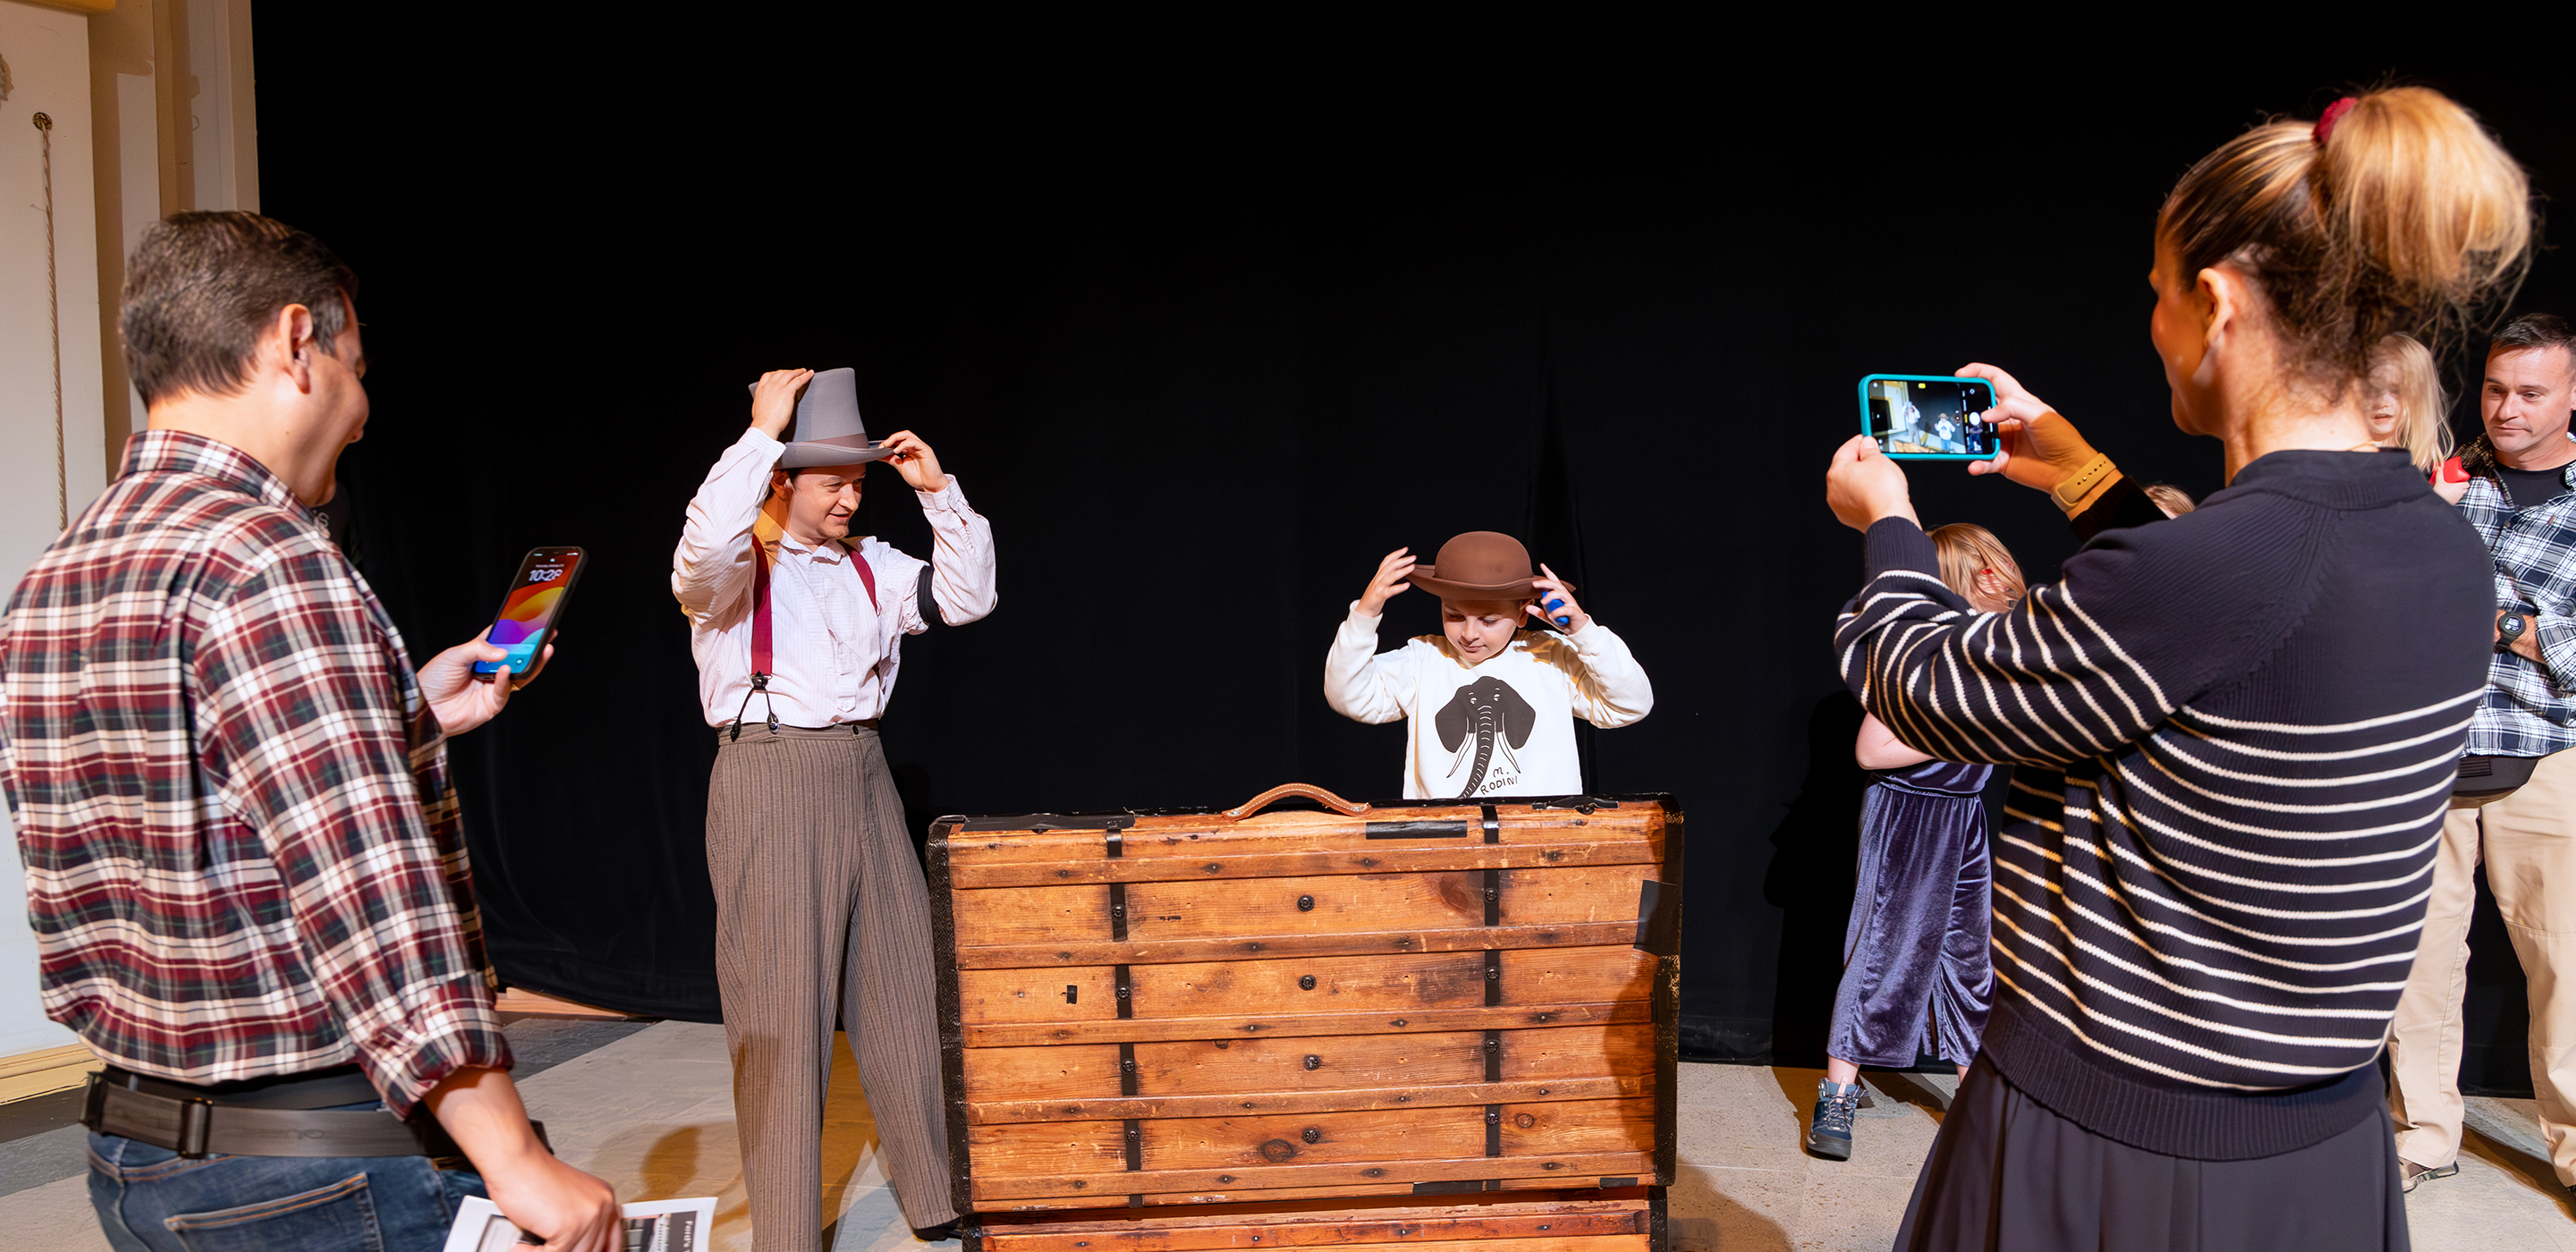 A neurodivergent child and a neurotypical actor put on hats, along with a neurotypical actor, behind an open wooden box on the Ford’s Theatre stage. His parents take photos of them.